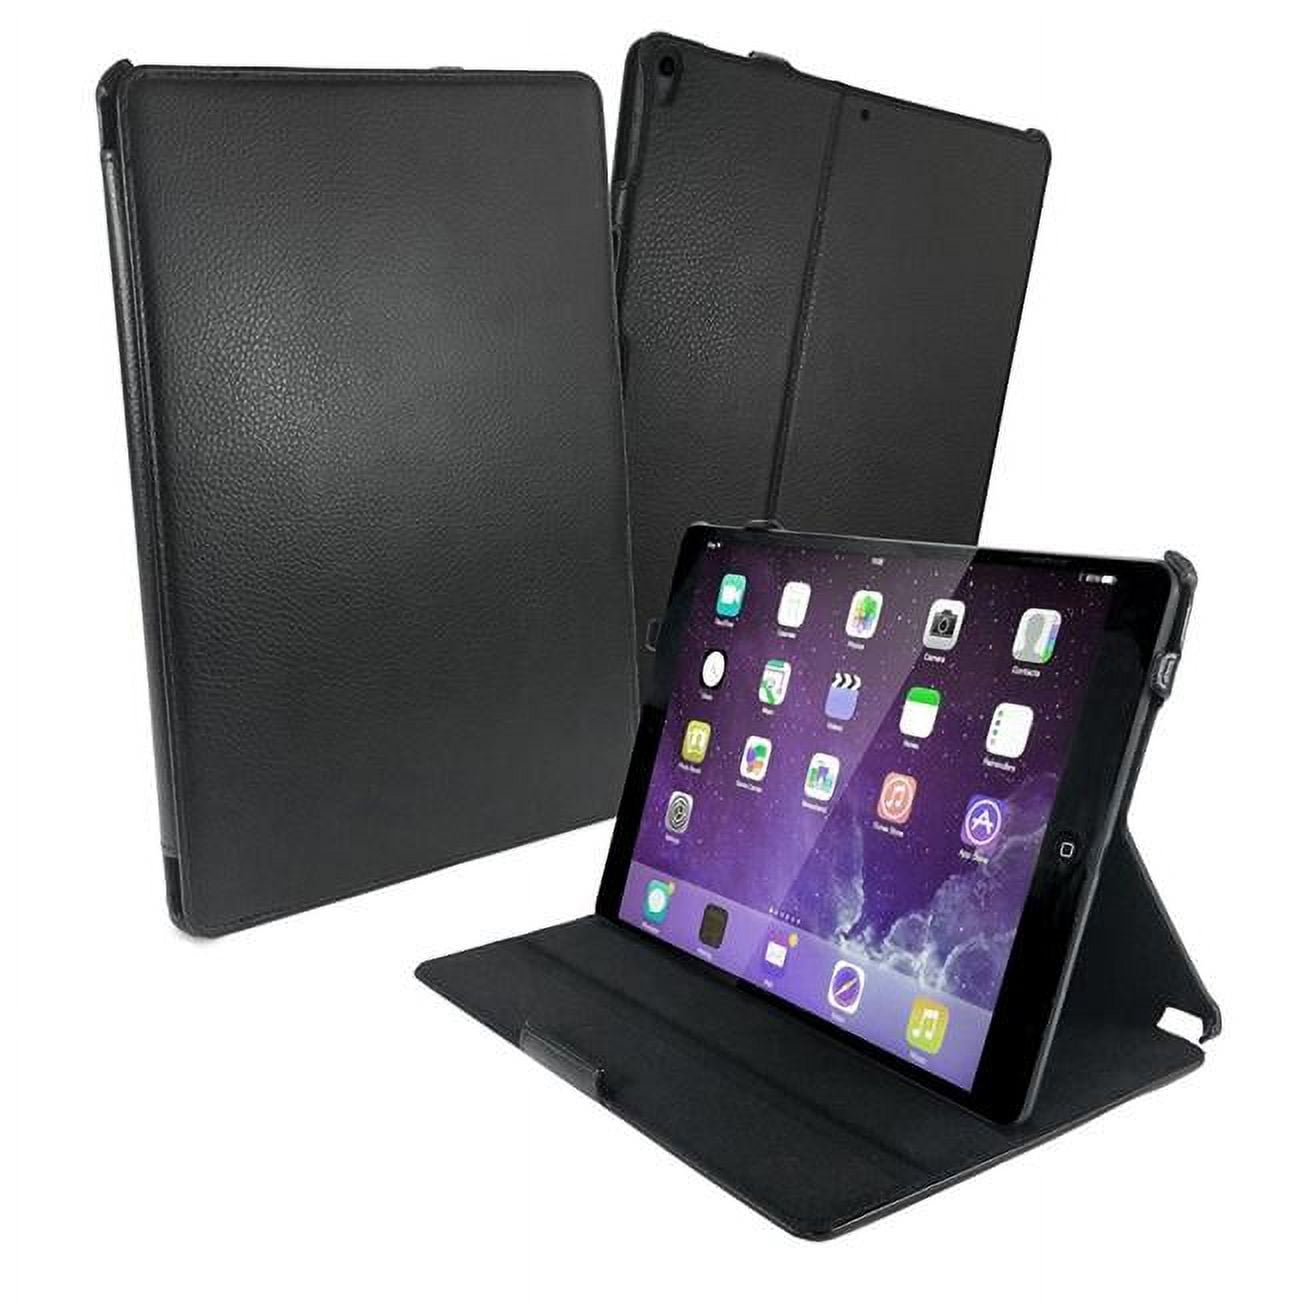 D1-49 Multi-View Faux Leather Case Cover & Stand for Apple iPad Pro, Black - 10.5 in -  Tuff-luv, D1_49